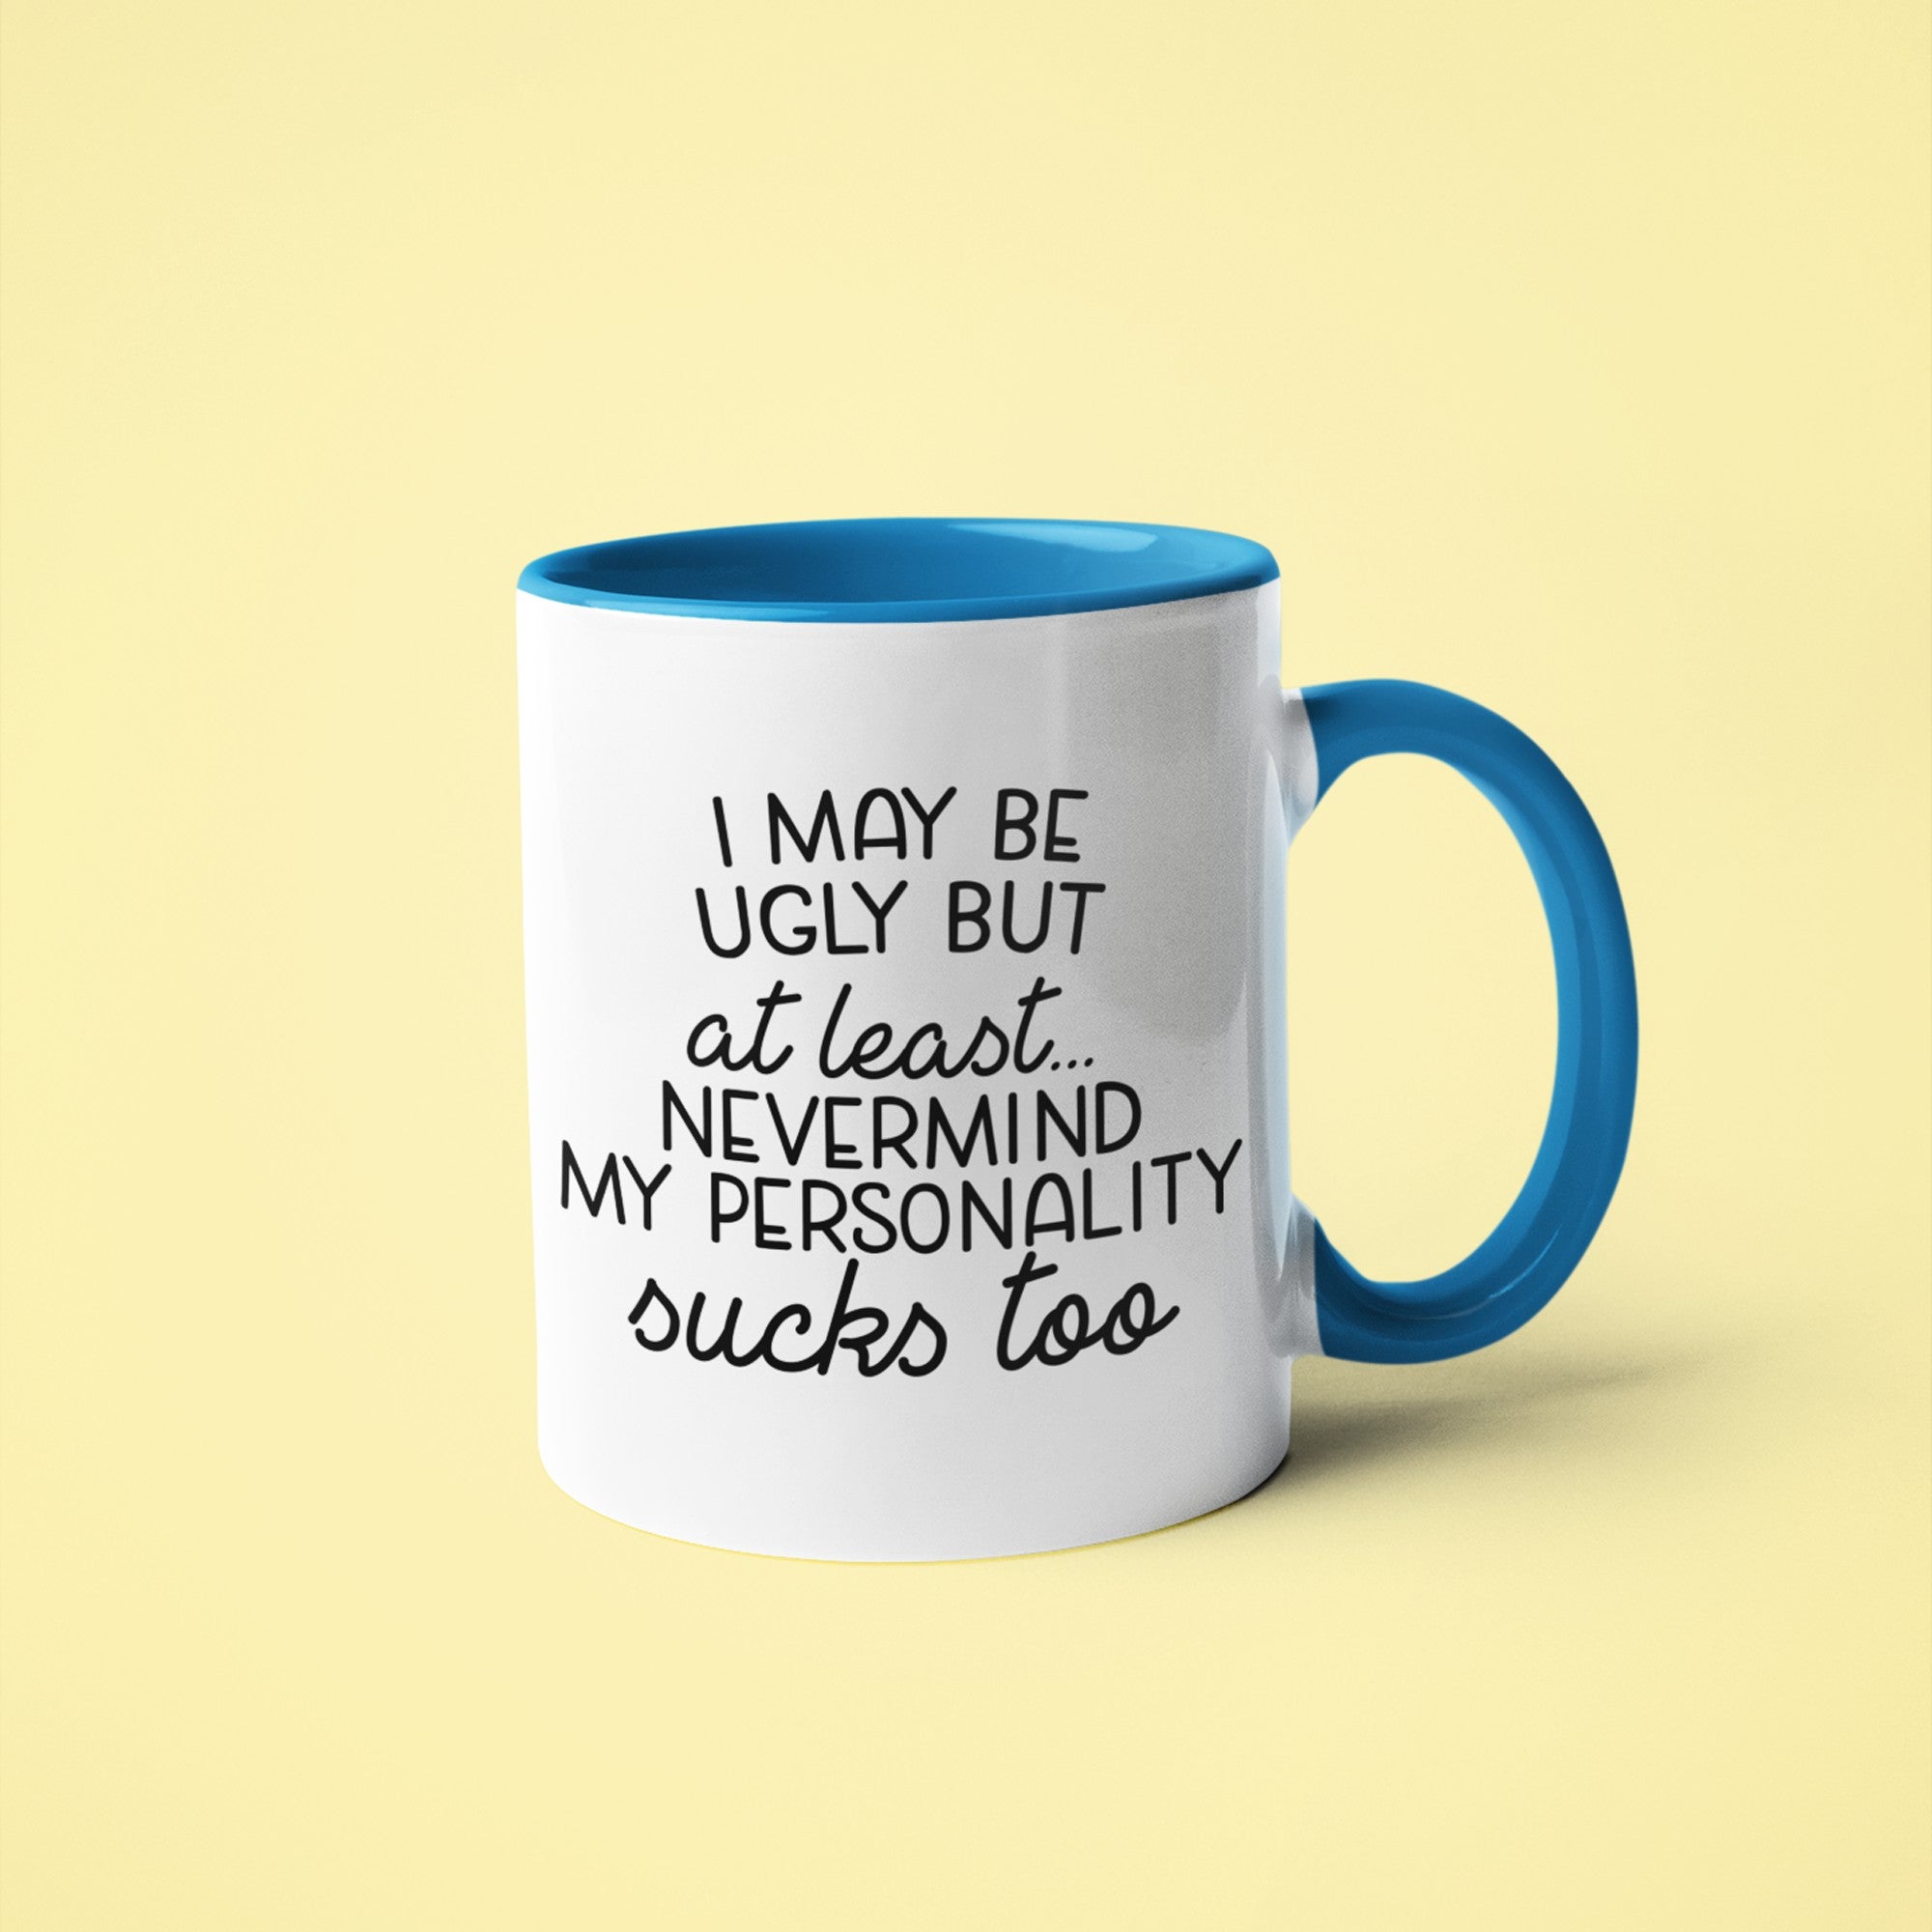 I may be ugly but at least... Nevermind my personality sucks too Printify